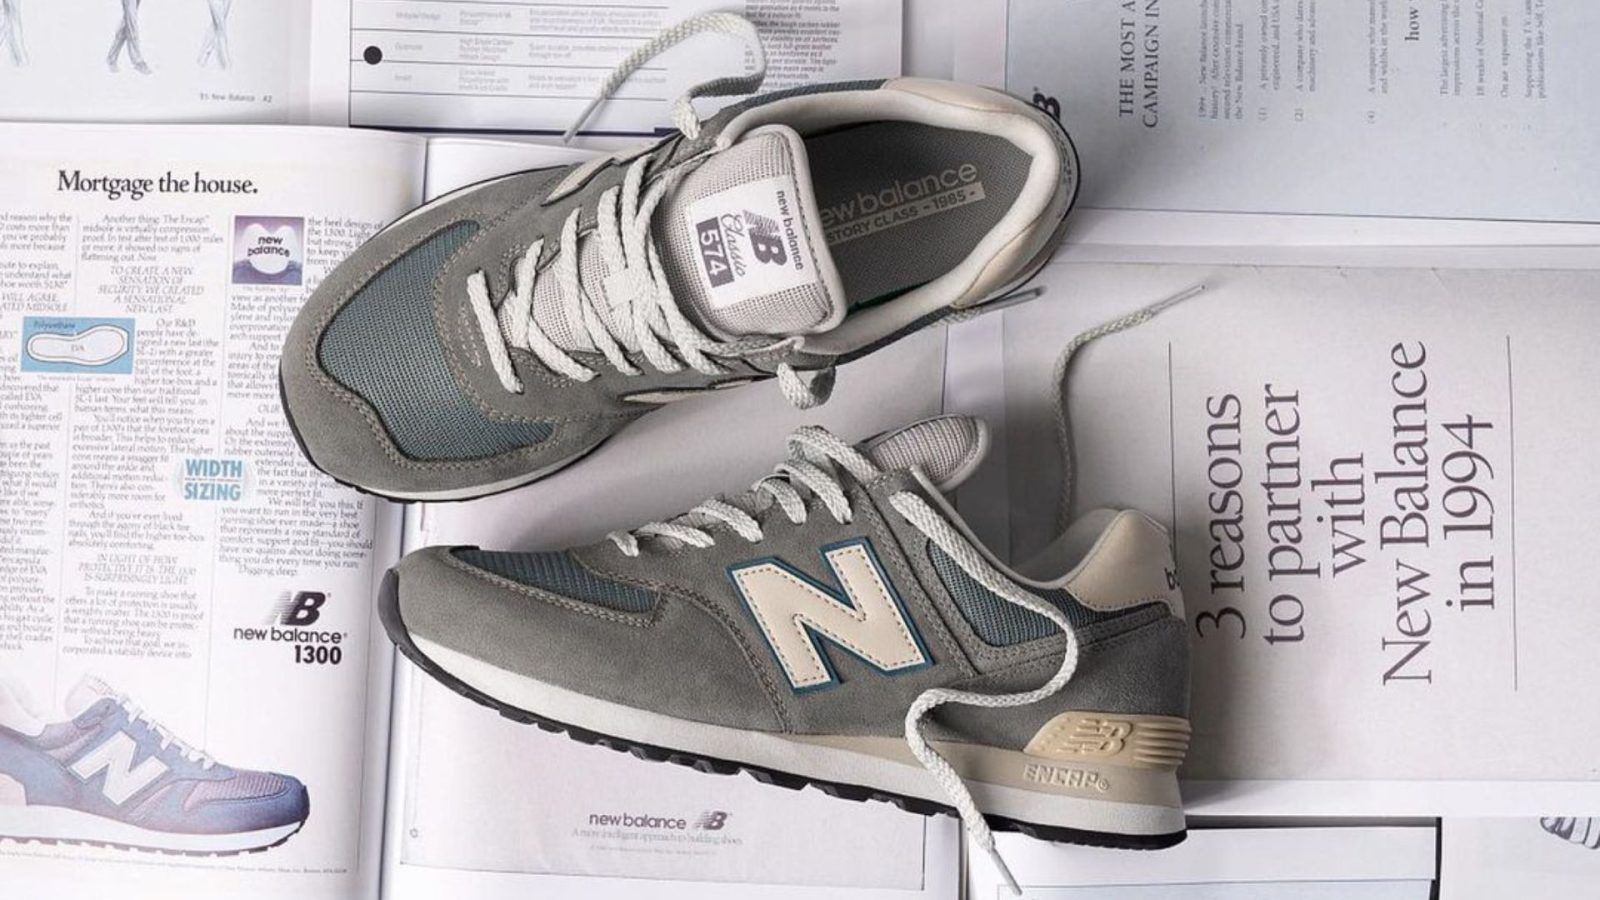 These New Balance sneakers worthy be added to collection